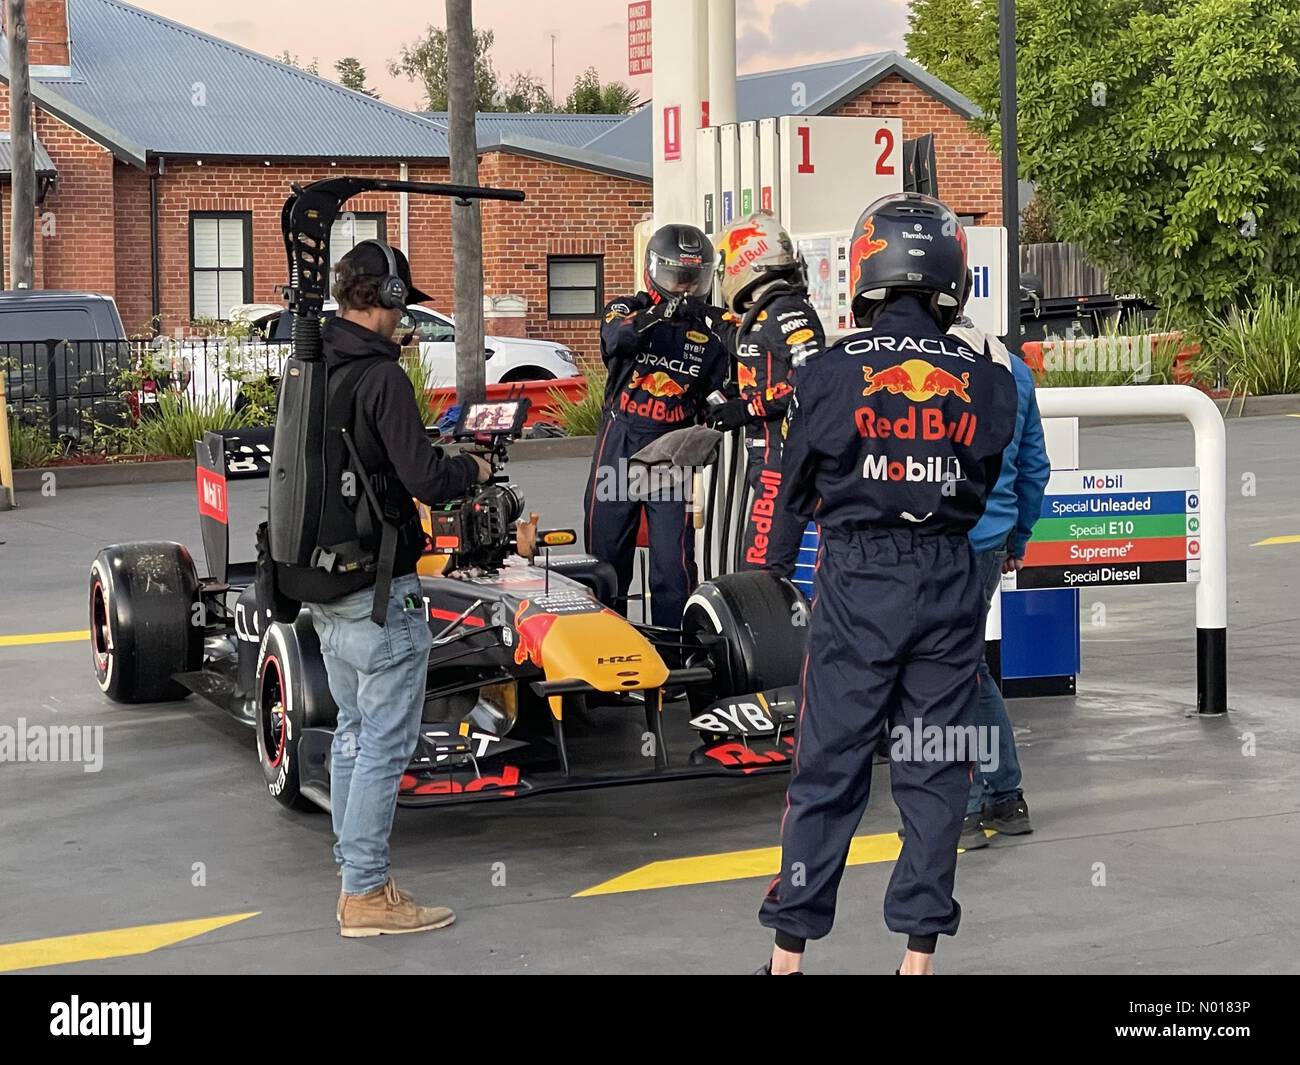 F1 driver Liam Lawson seen filming a Red Bull commercial at a 7 Eleven service station in Bathurst, NSW, Australia Credit: mjmediabox/StockimoNews/Alamy Live News Stock Photo